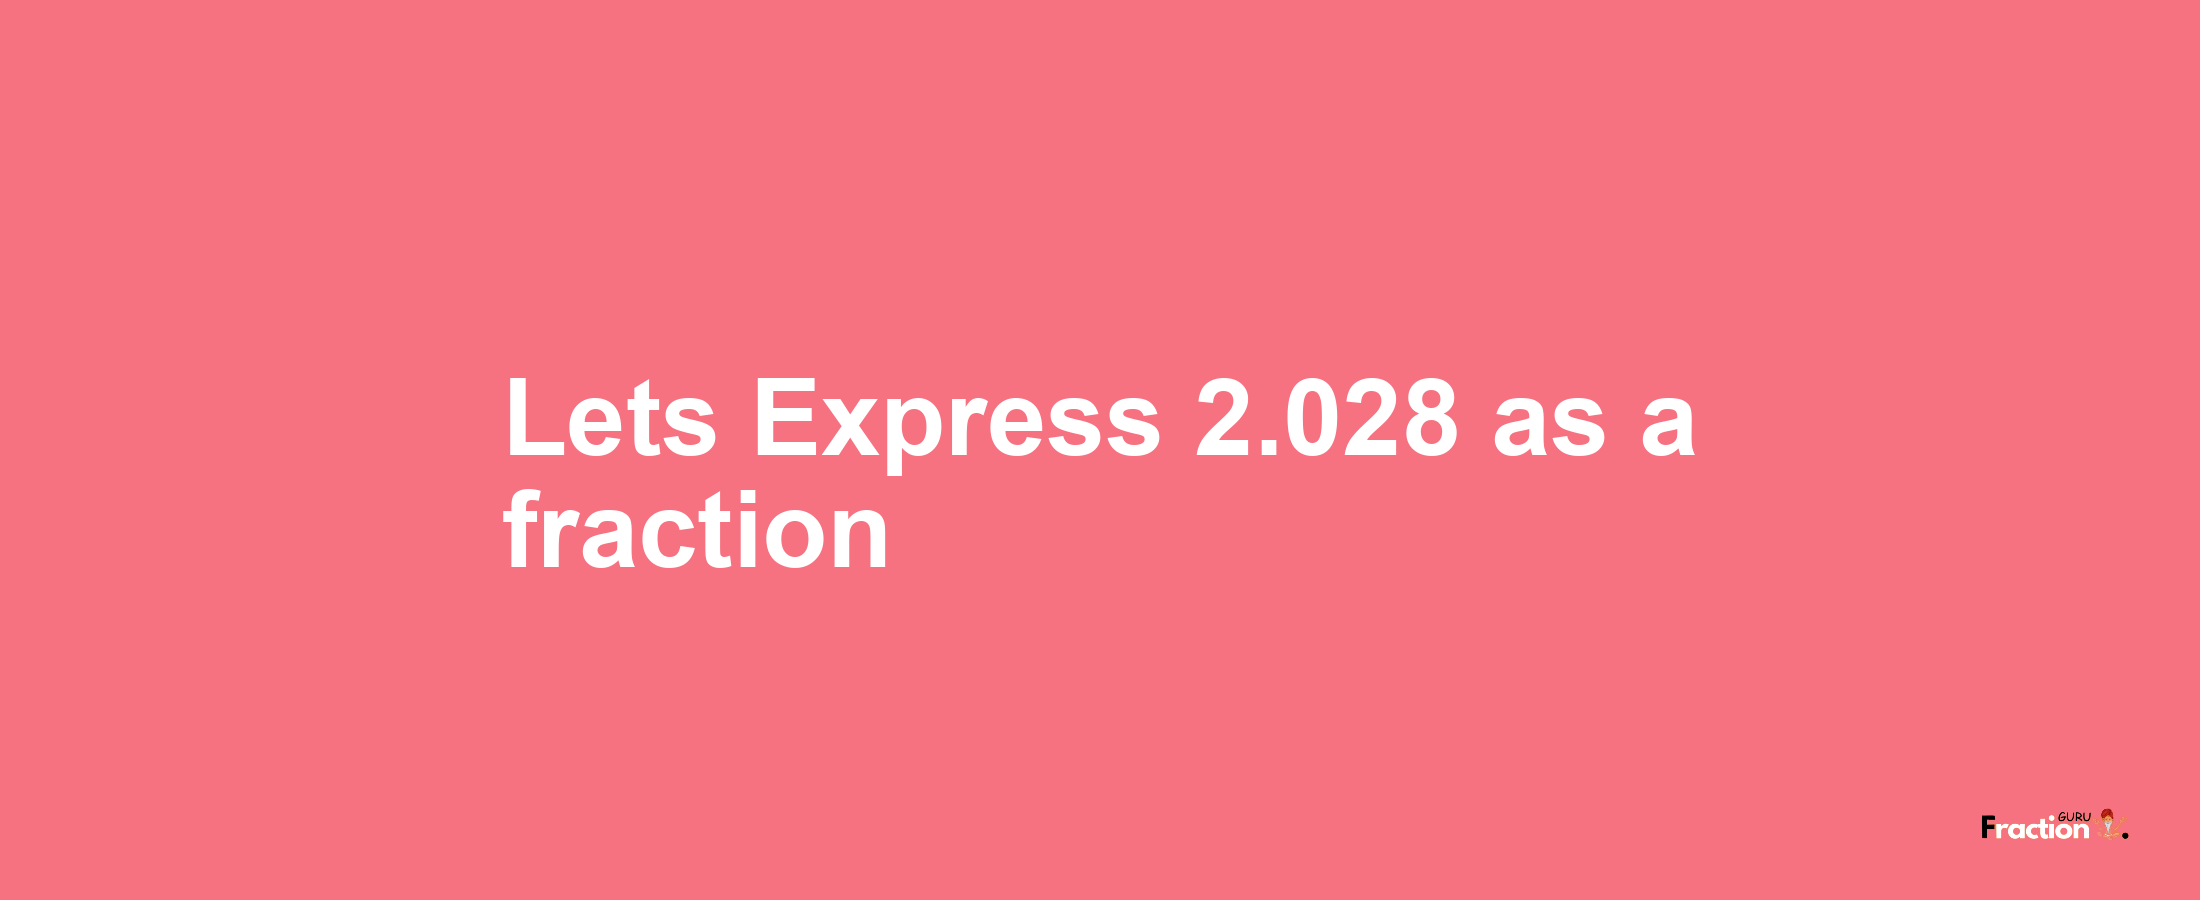 Lets Express 2.028 as afraction